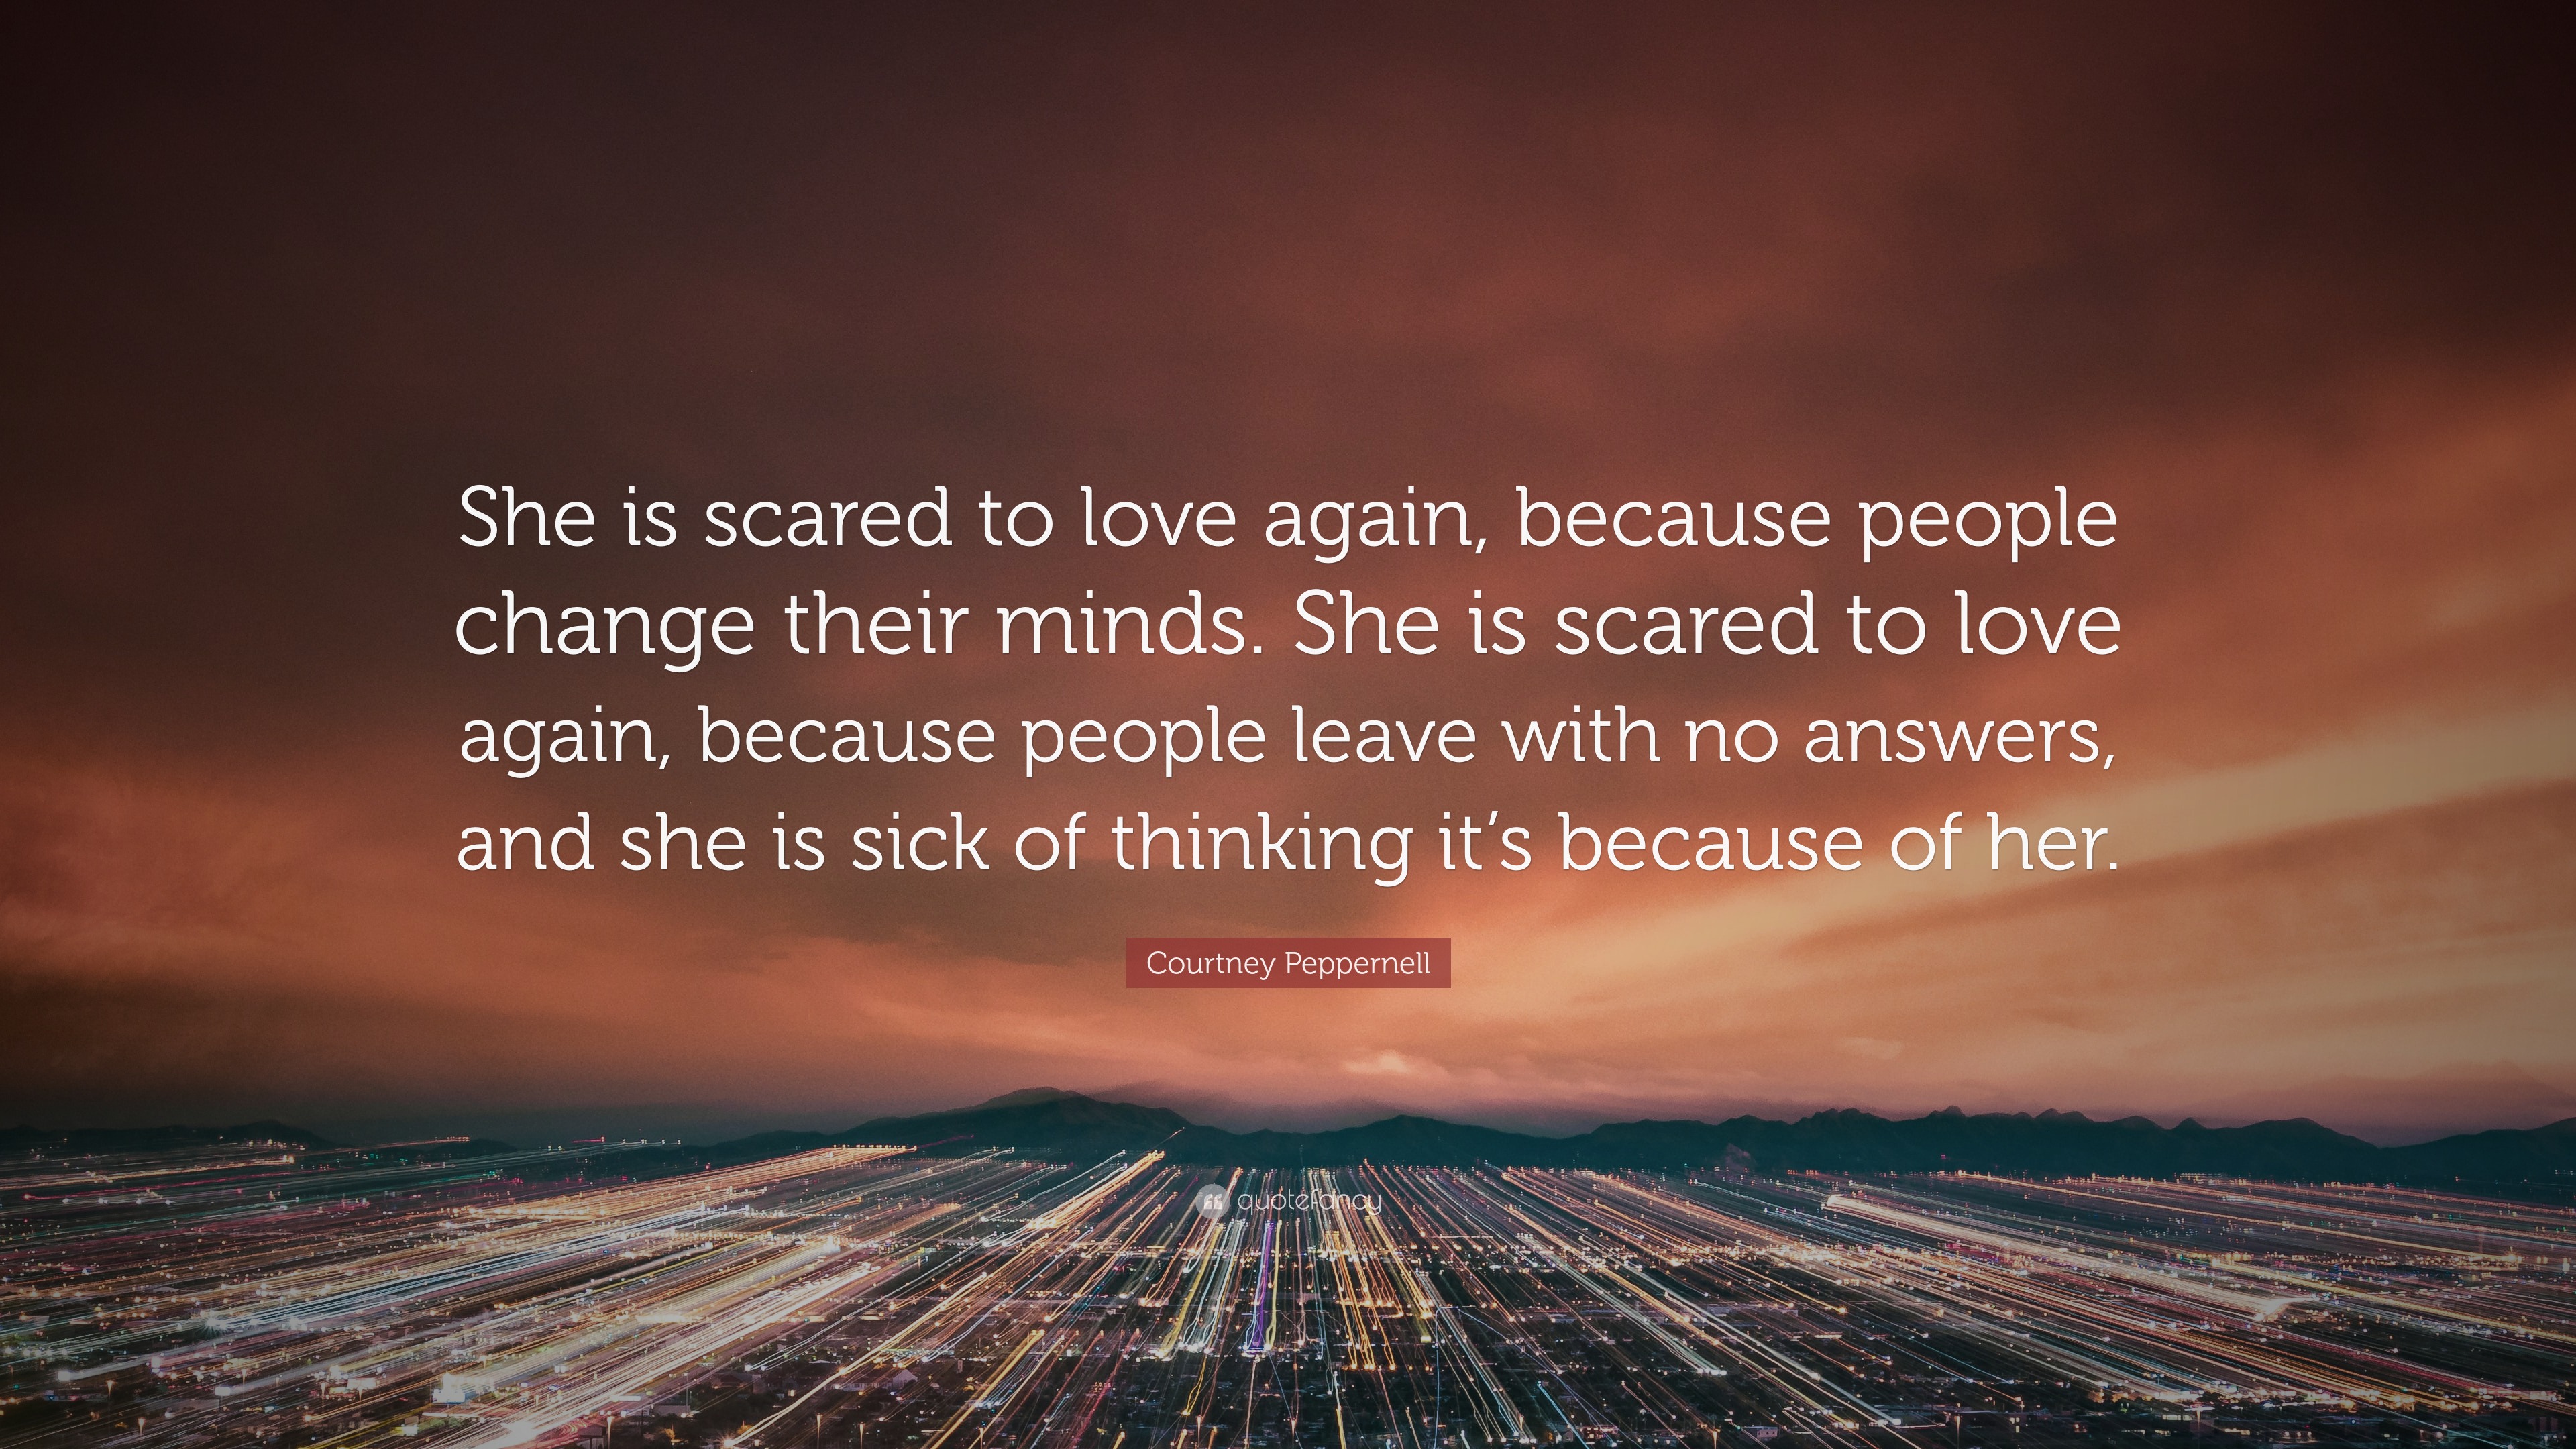 Courtney Peppernell Quote: “She is scared to love again, because